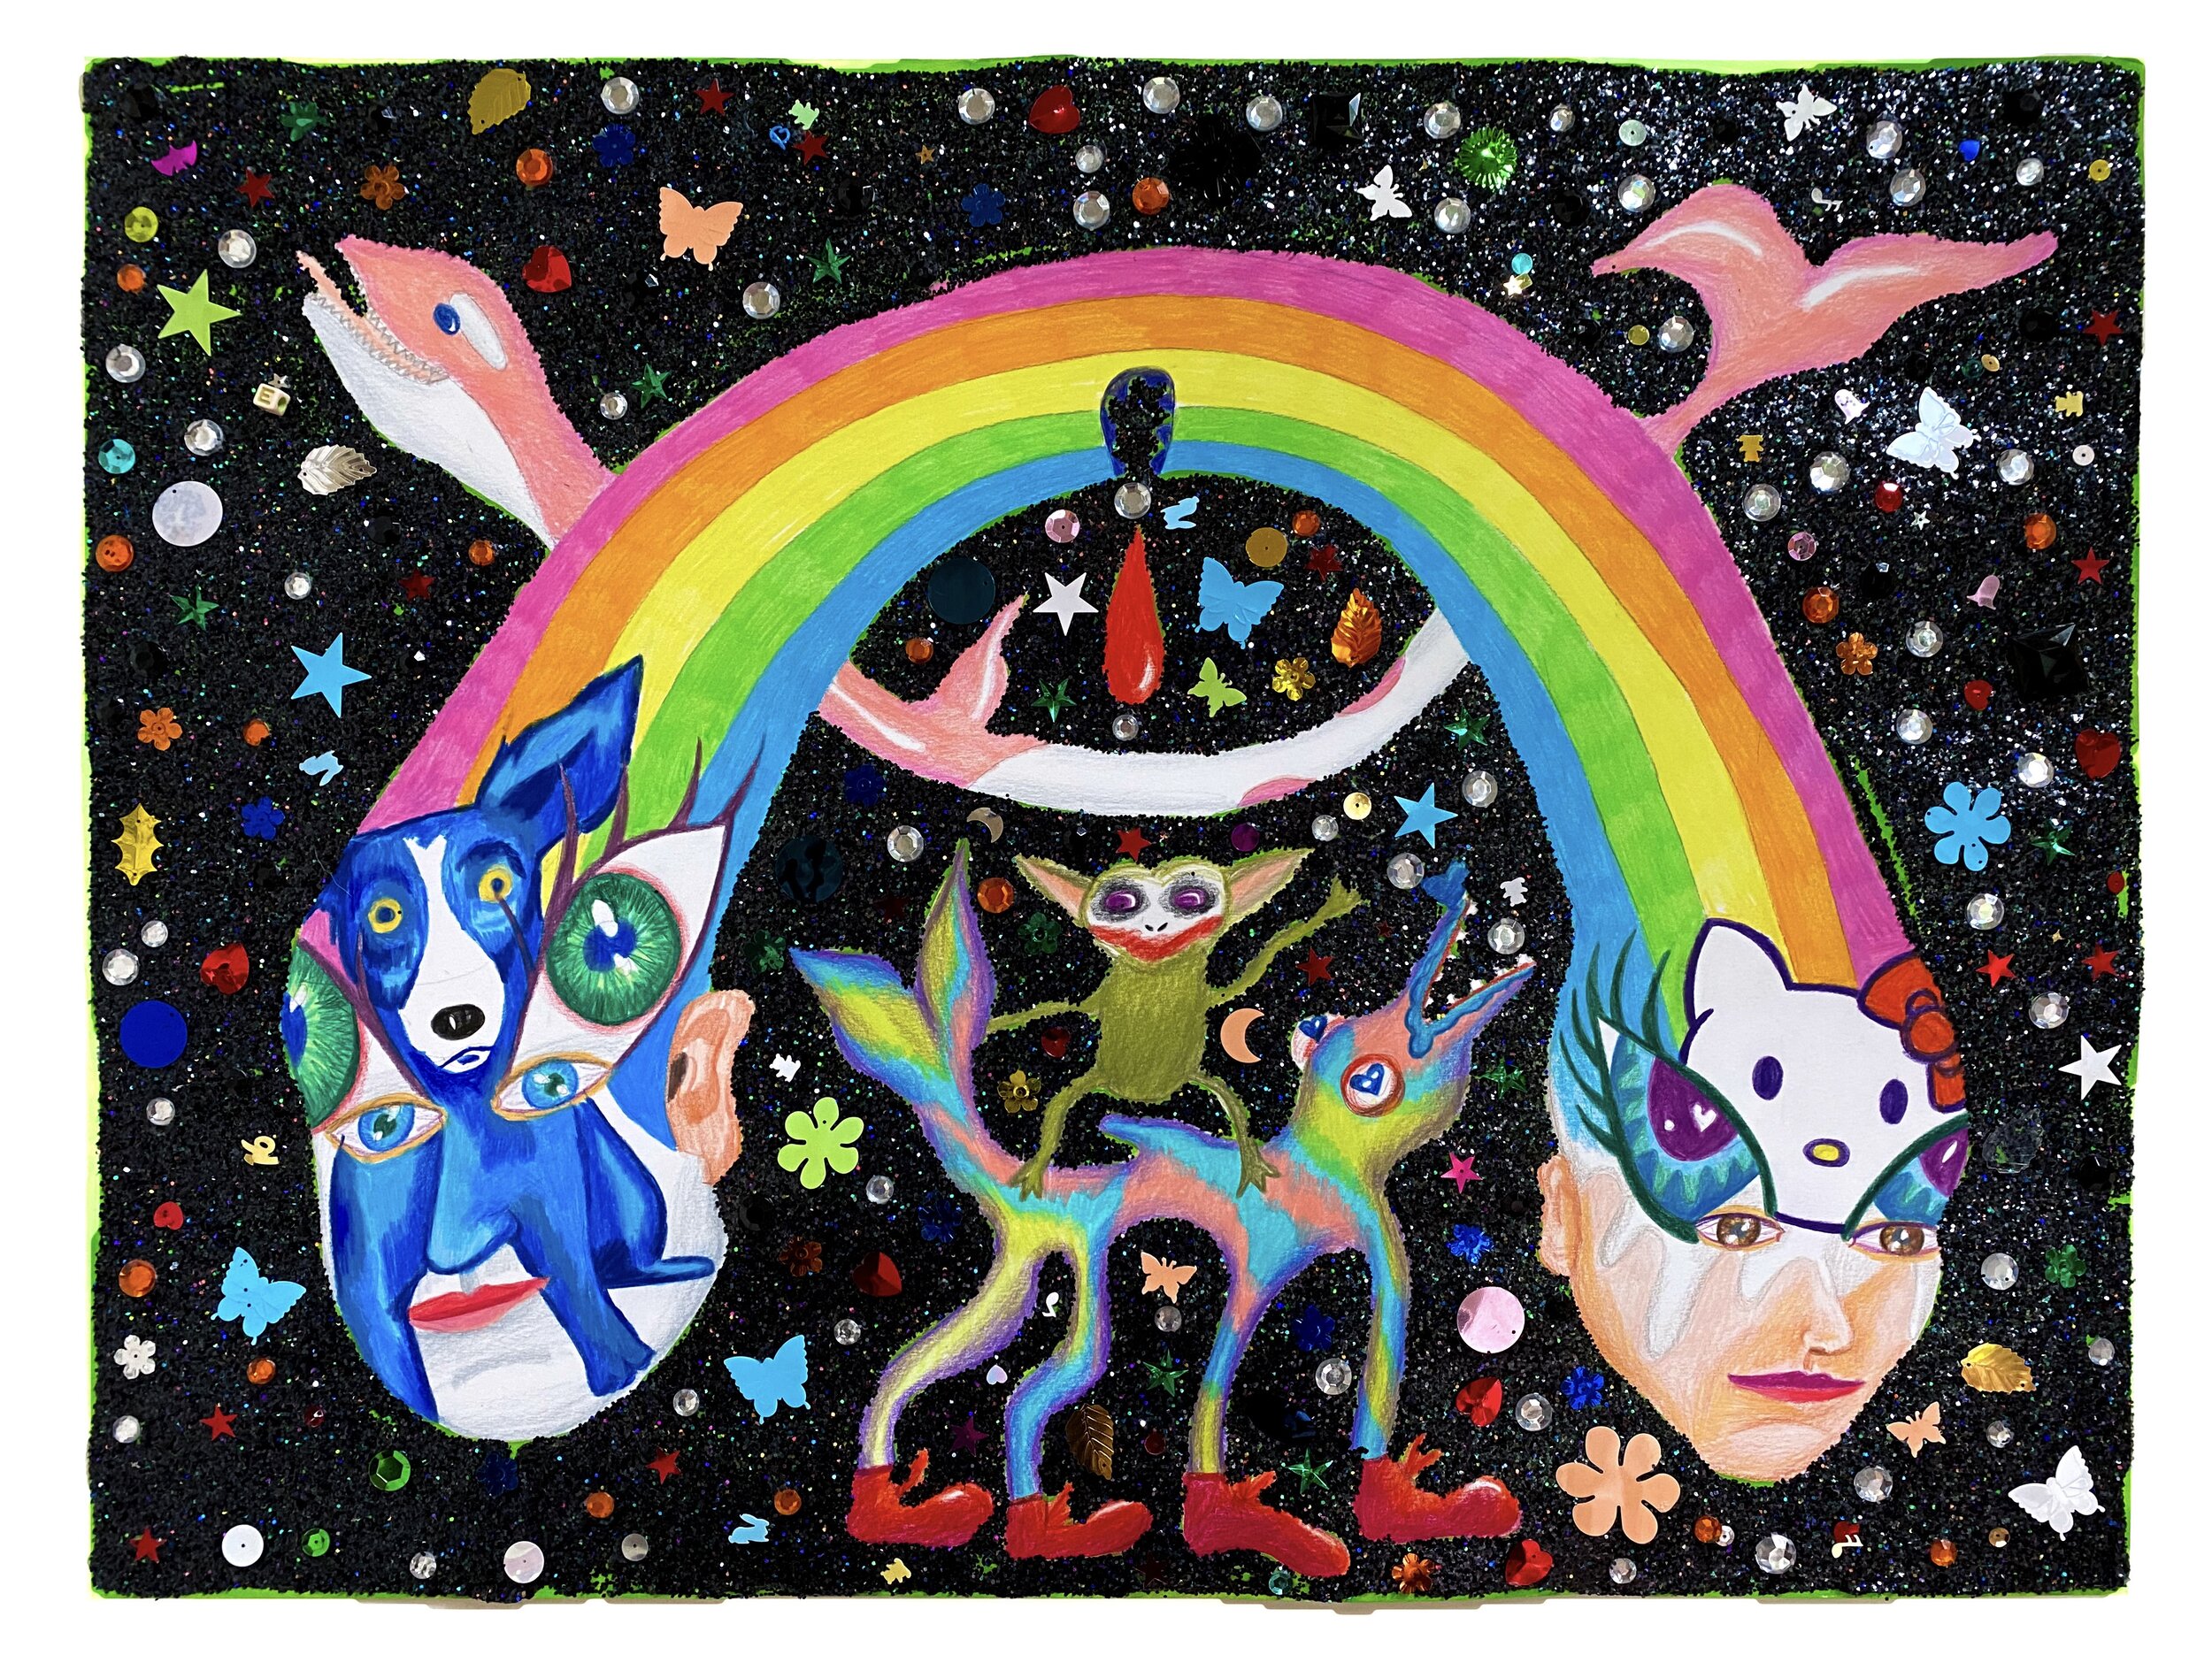   Indigo Children with Cat and Dog Face Paint,  2021  24 x 18 inches (60.96 x 45.72 cm.)  Colored pencil, acrylic paint, Elmer's glue, Modge Podge, sequins, plastic gems, and glitter on paper 